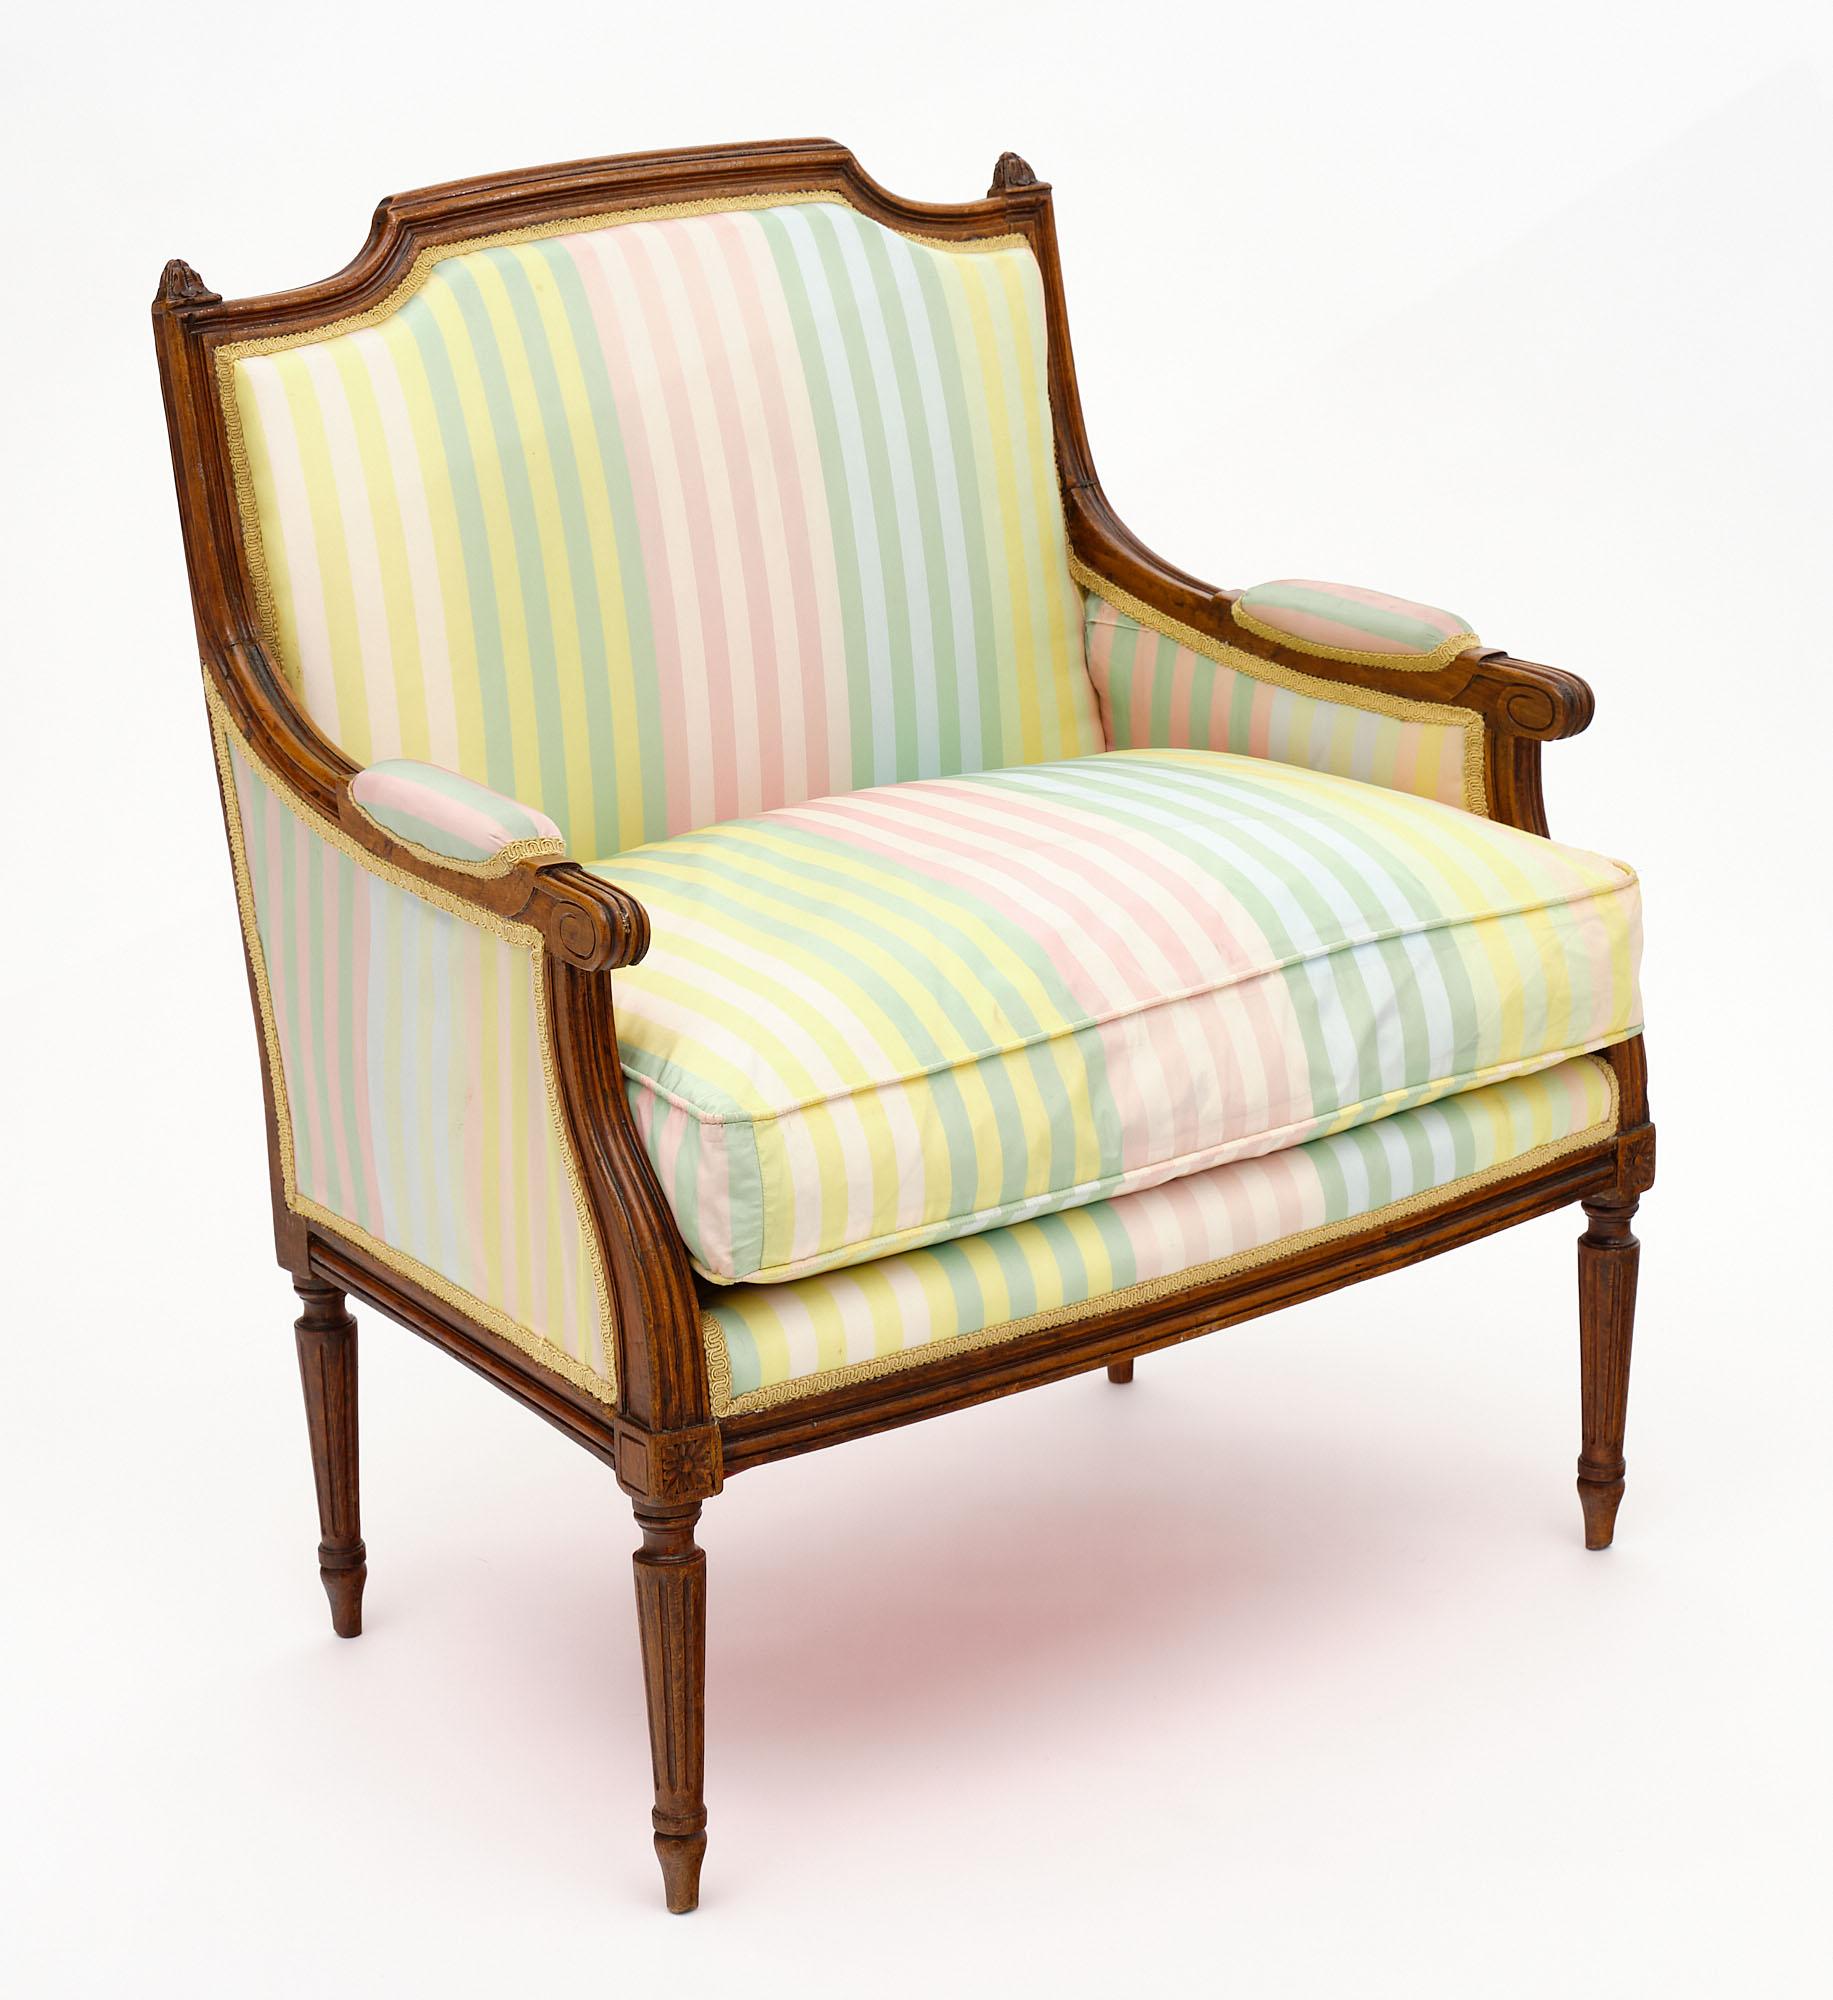 Duchesse Louis XVI style armchair from France. This antique piece is in excellent condition structurally.